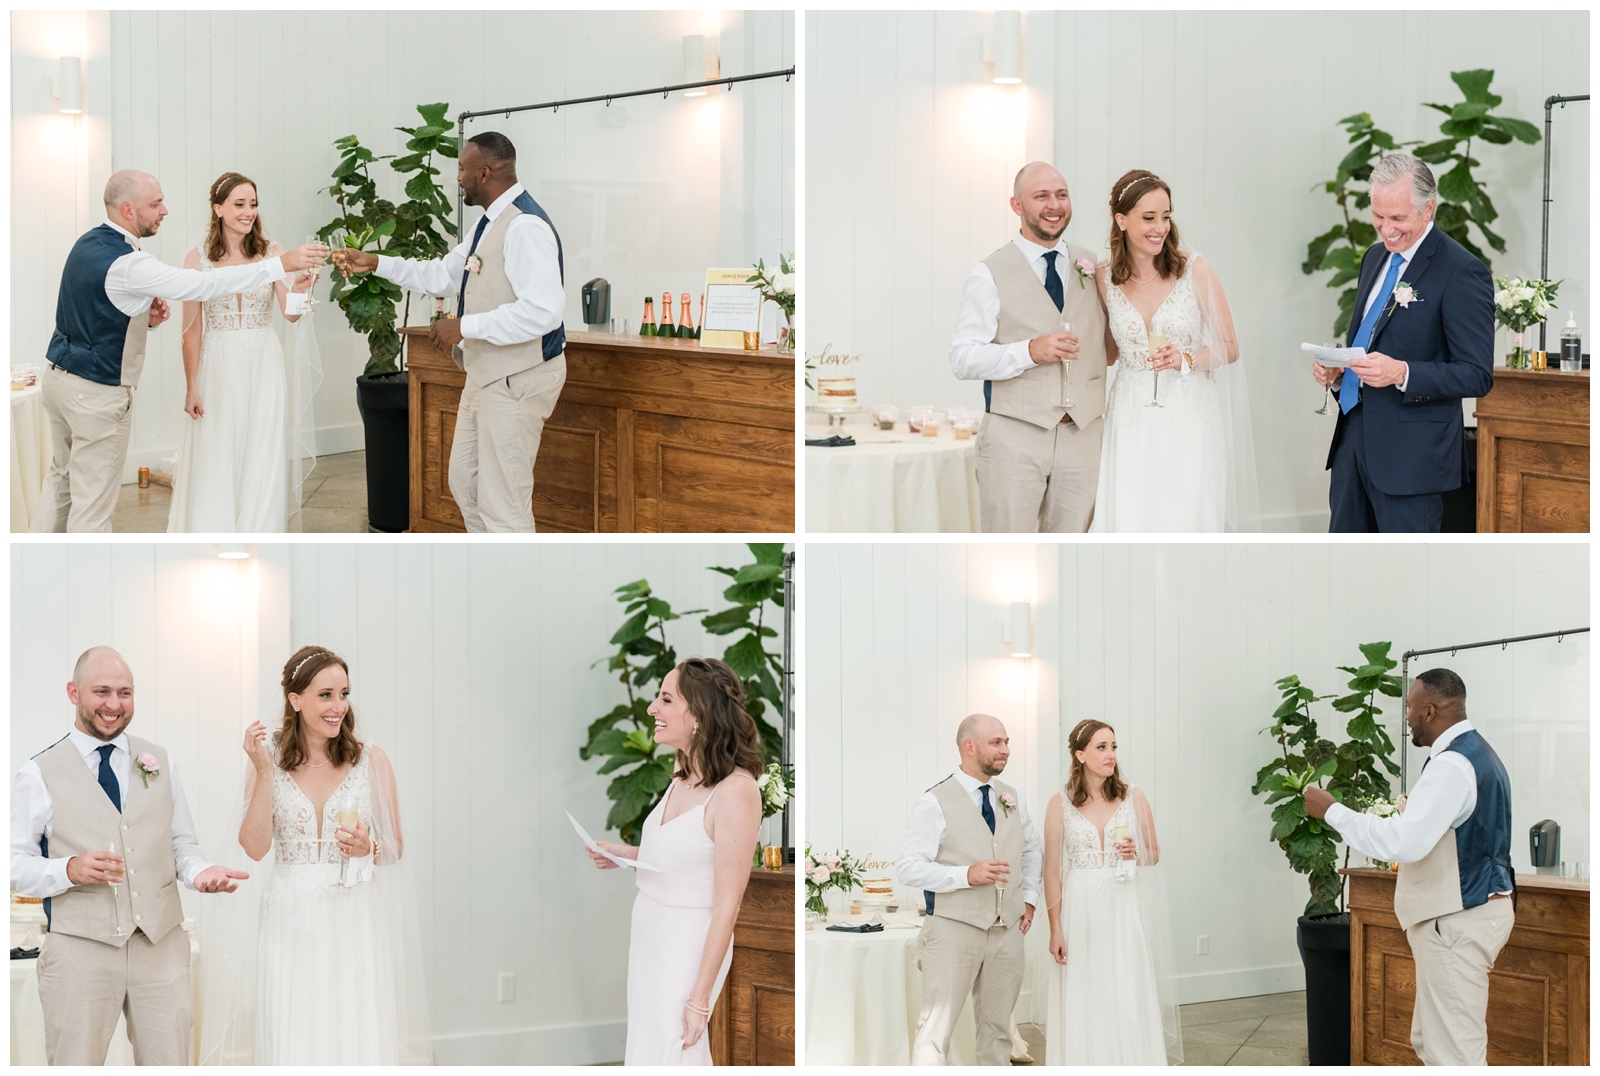 wedding toasts by groomsman, maid of honor, and father of the bride